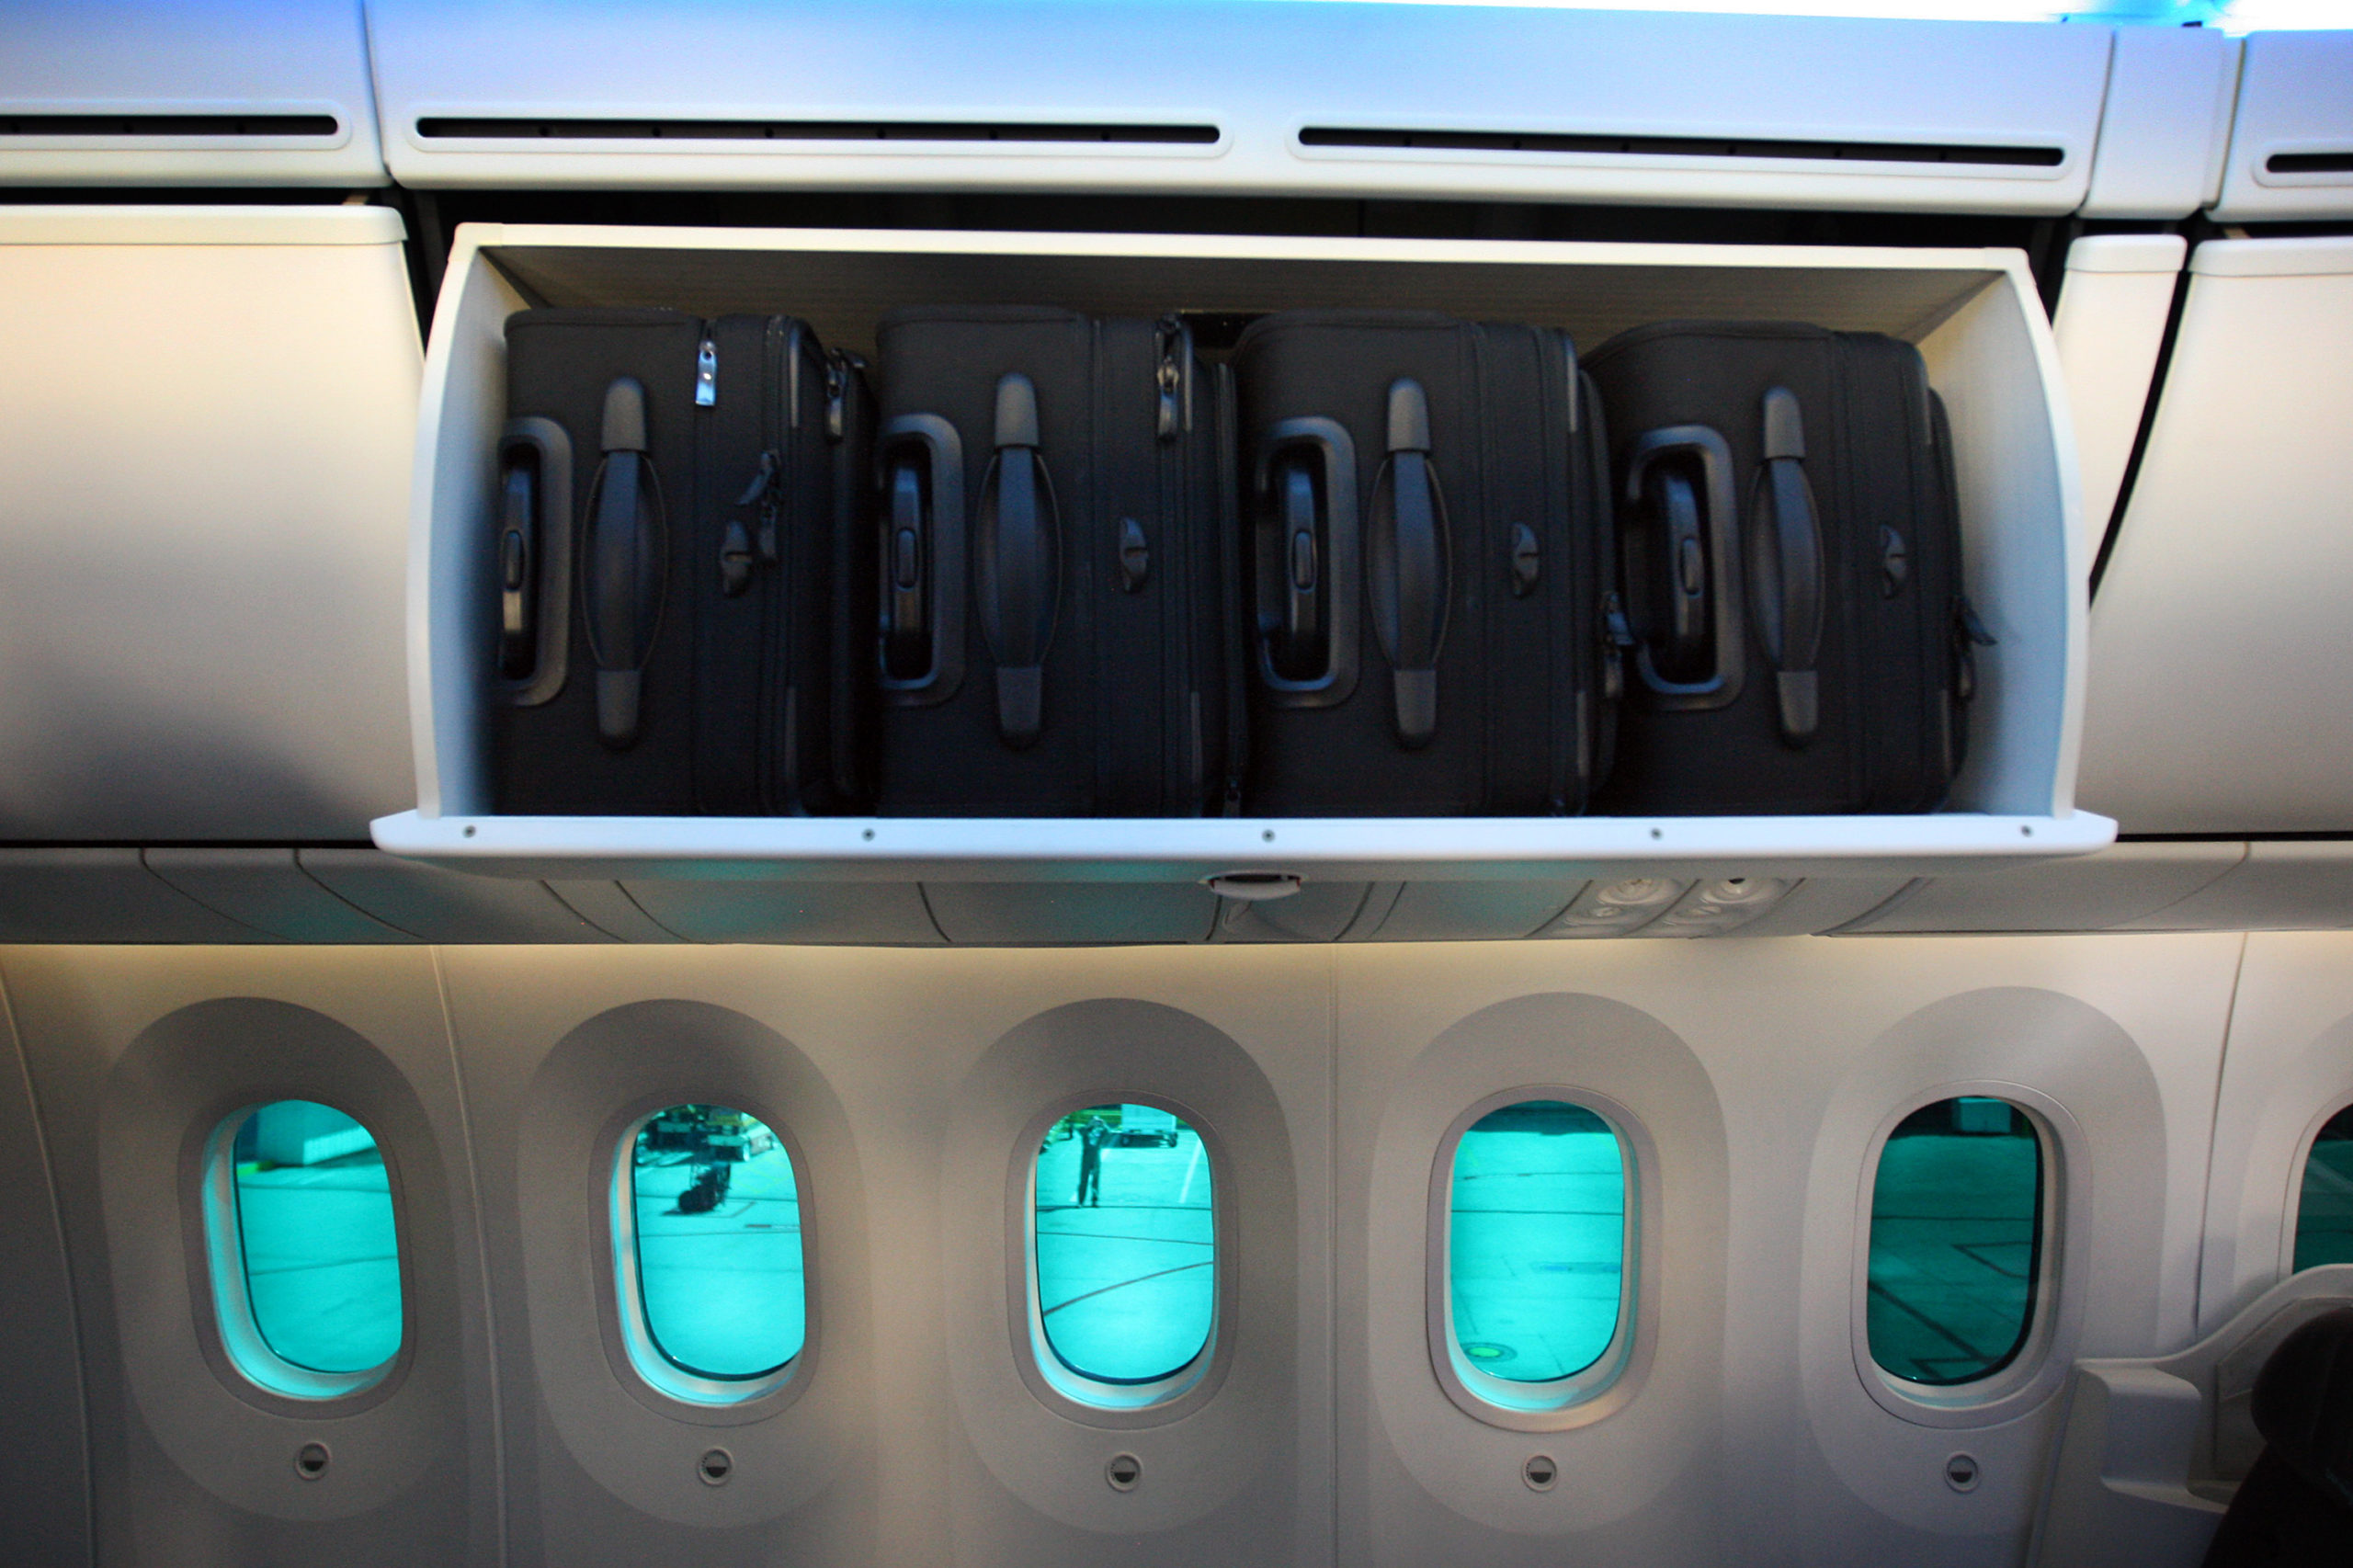 LONG BEACH, CA - MARCH 14: Windows that can darken with the press of a button and luggage in an overhead compartment are seen aboard the new Boeing 787 Dreamliner passenger jet on March 14, 2012 in Long Beach, California. Boeing employs more than 20,000 people in California. making it one of the largest private employers in the state. (Photo by David McNew/Getty Images)